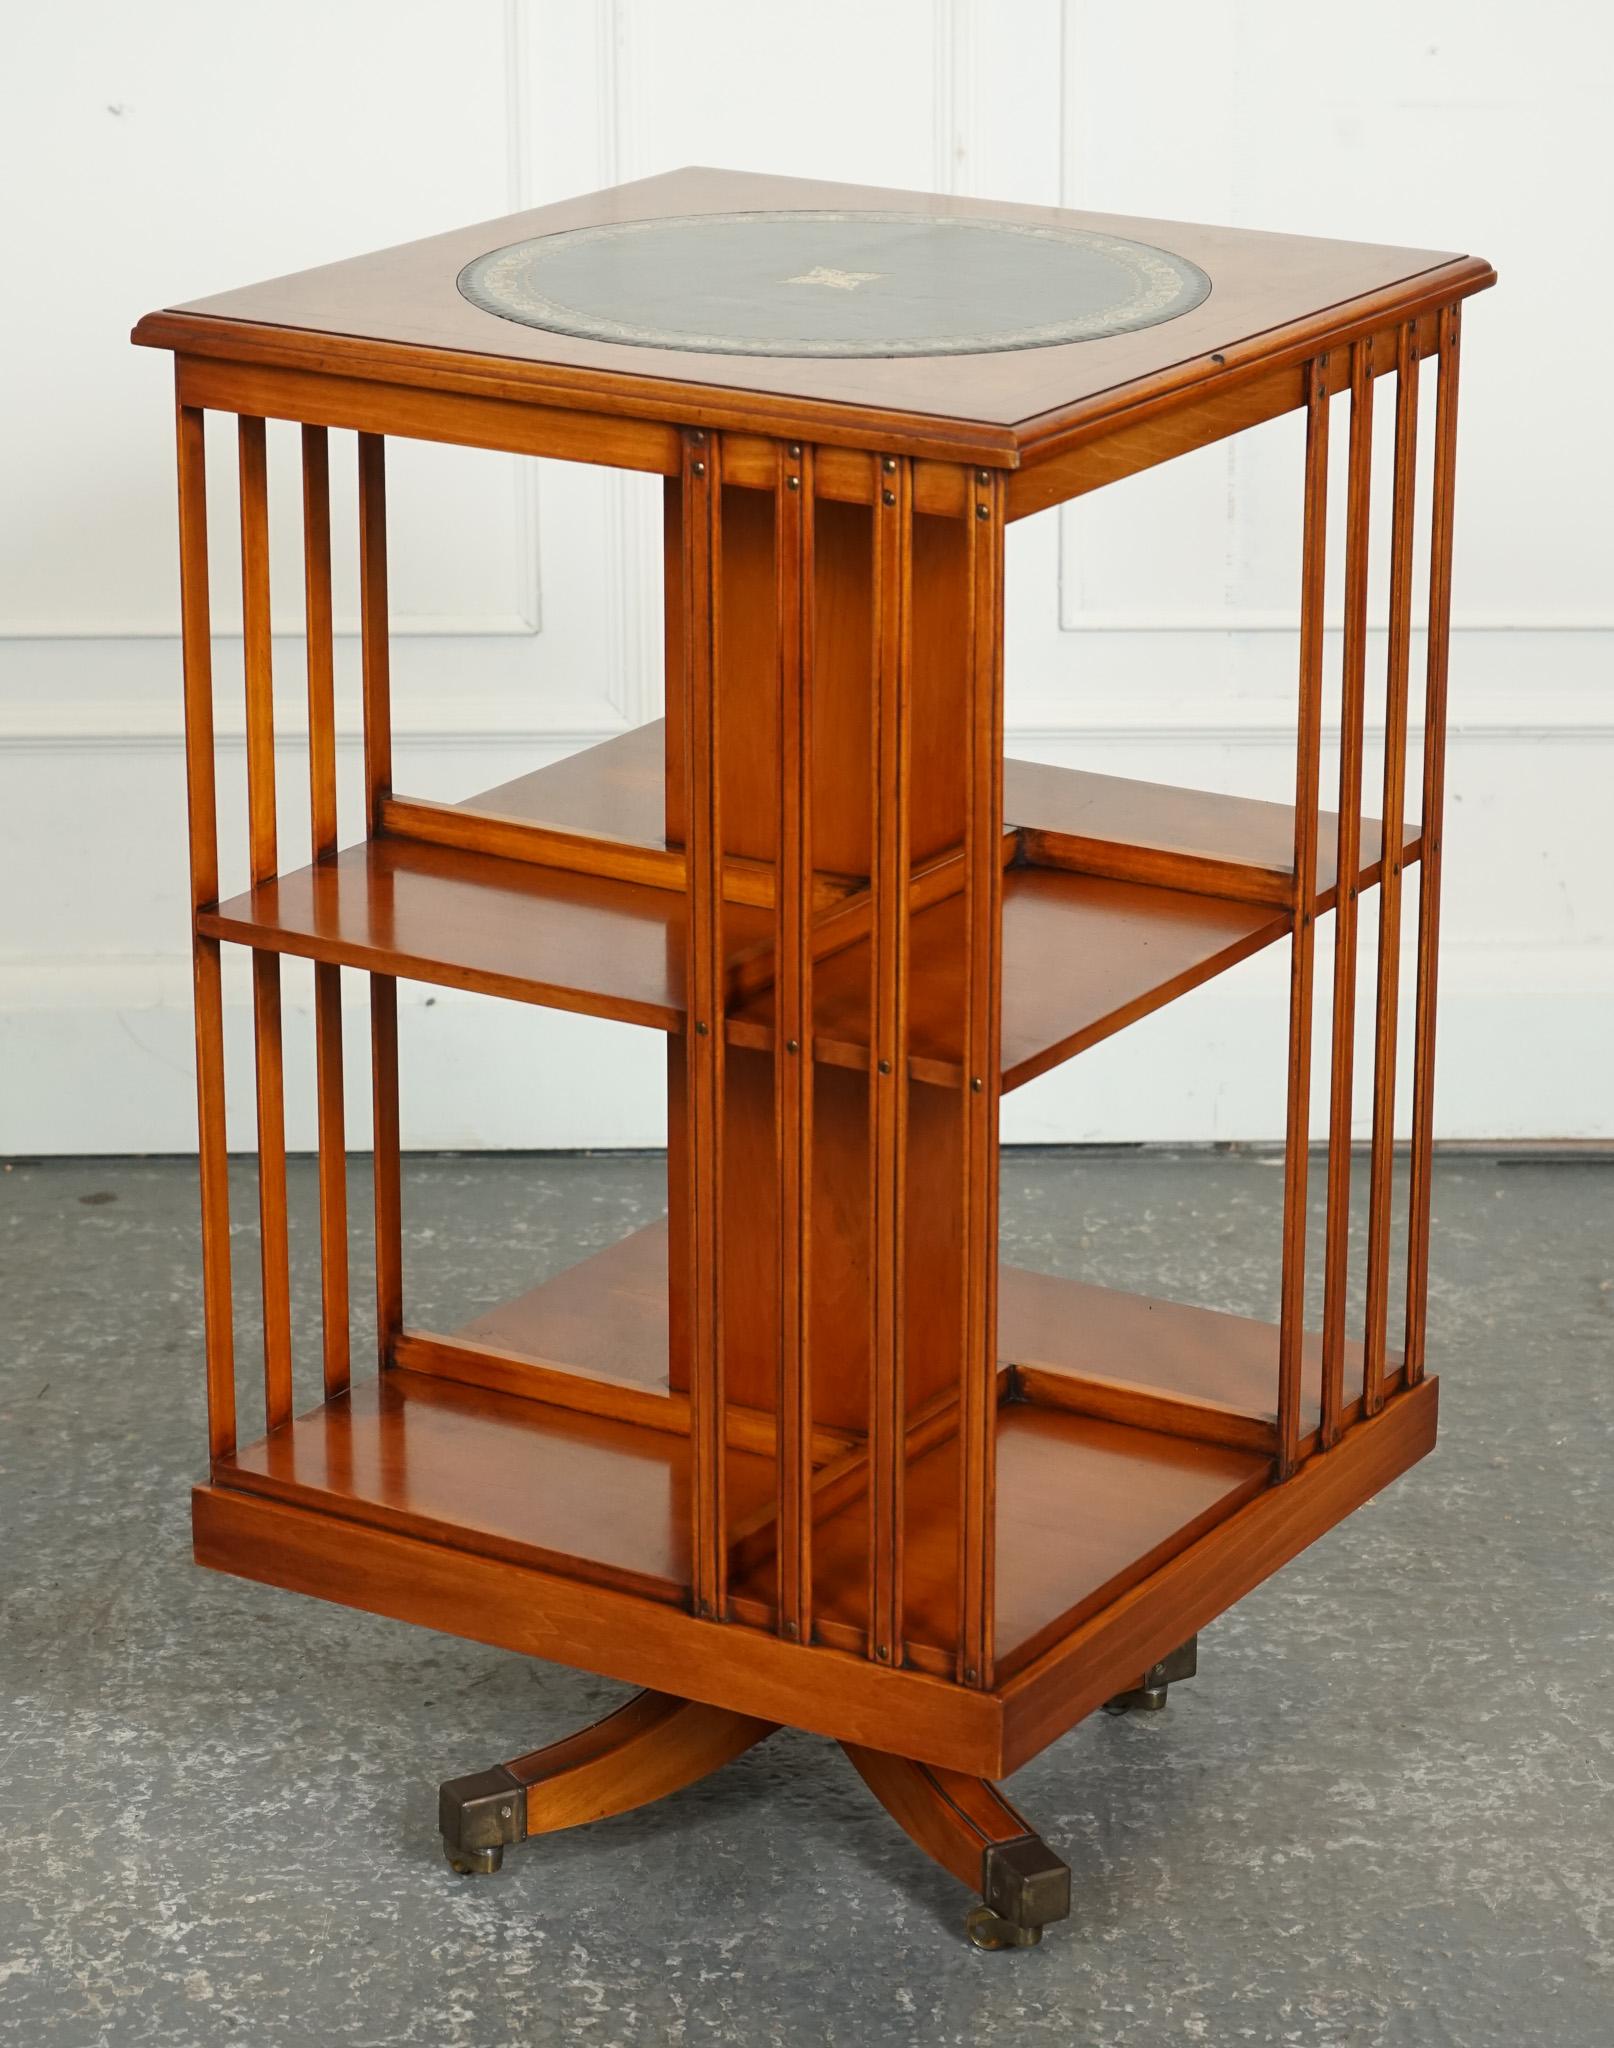 

We are delighted to offer for sale this Bevan Funnell Revolving Bookcase.

A Bevan Funnell Burr Walnut Green Leather Top Revolving Bookcase is a luxurious and elegant piece of furniture that exudes sophistication and class. Crafted from burr